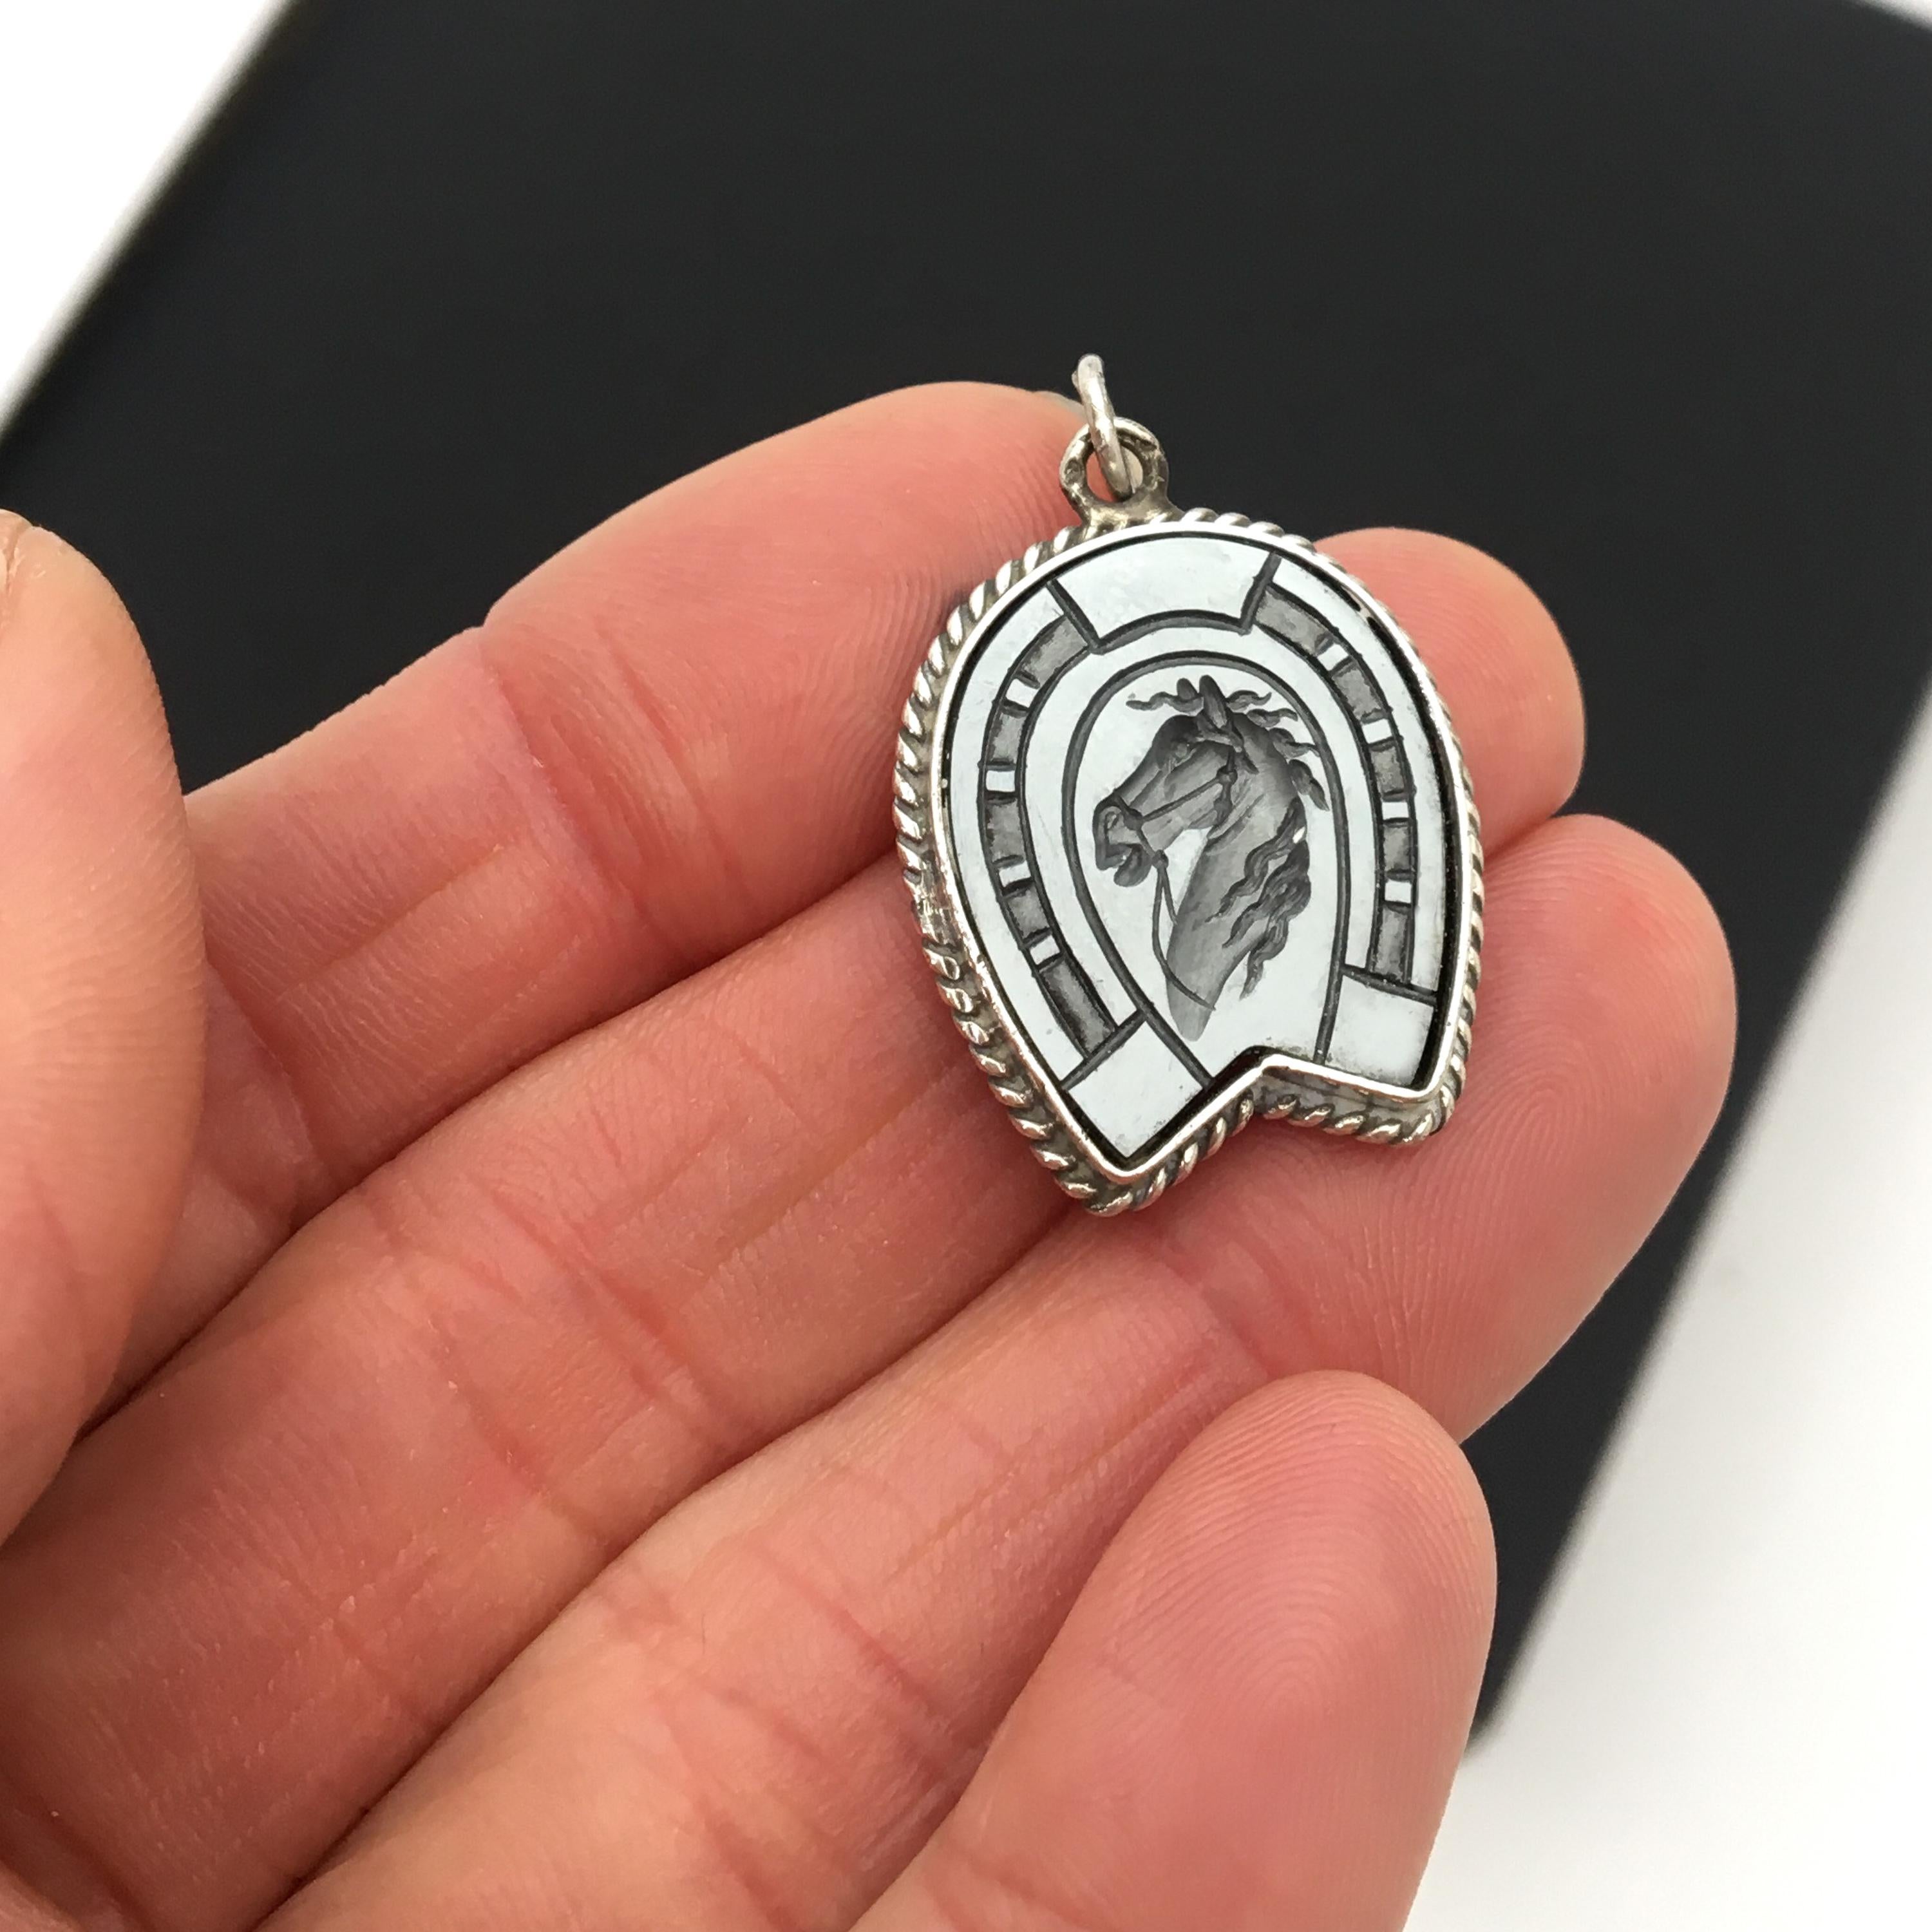 An equestrian vintage silver charm pendant in the shape of a horse shoe with an intaglio of a horse head. The stallion's head is beautifully detailed with his wild mane and ready for action. 

The charm would be great worn alone on a necklace charm,